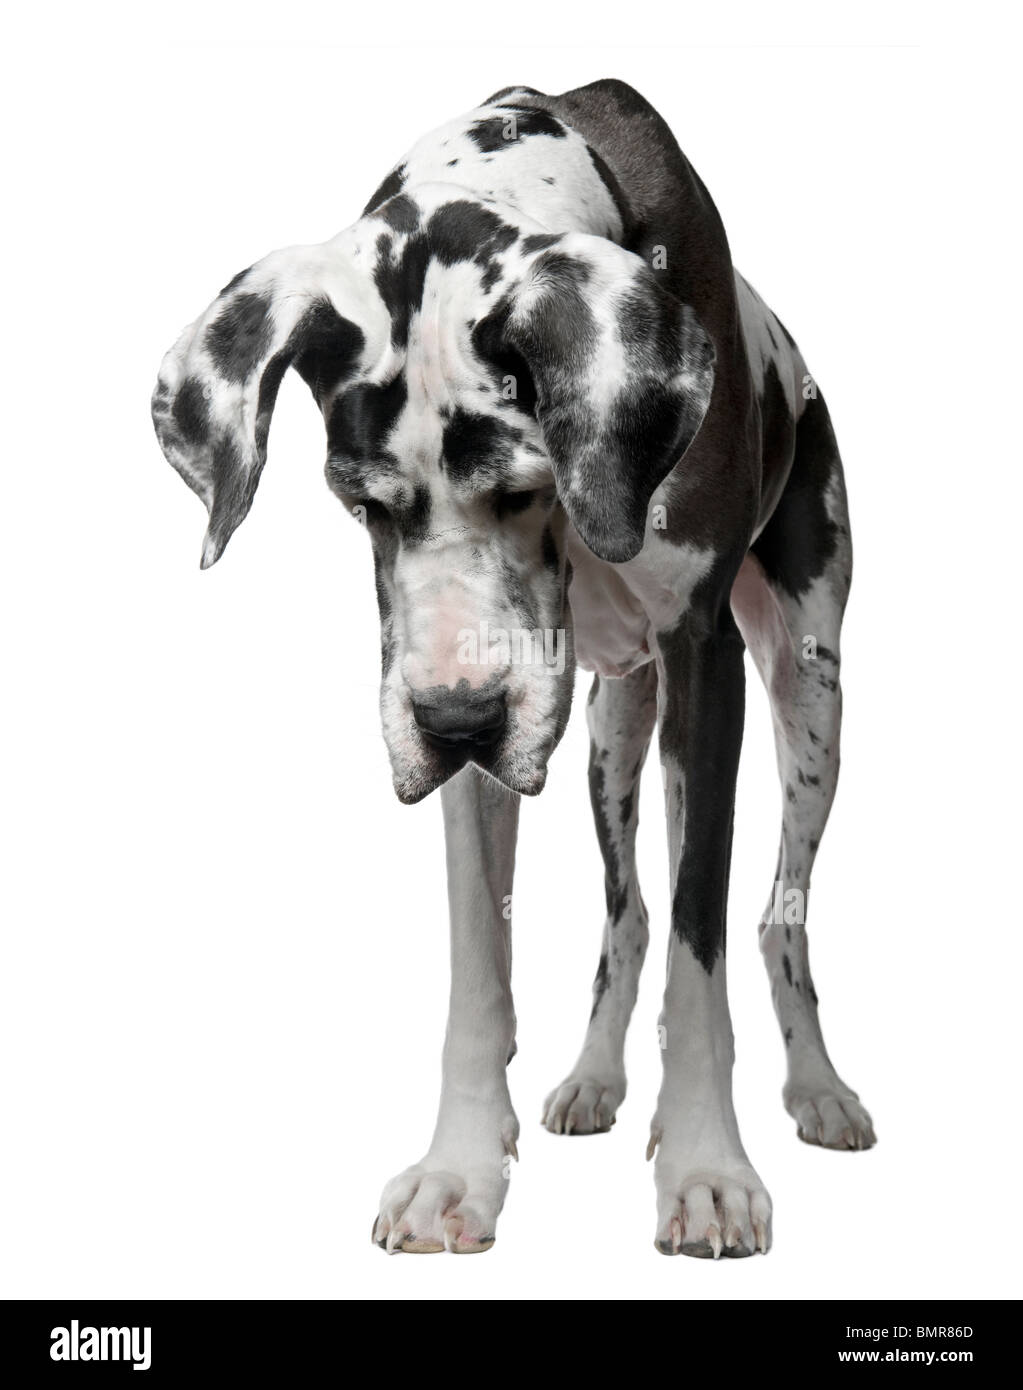 Harlequin Great Dane, 5 years old, standing against white background Stock Photo